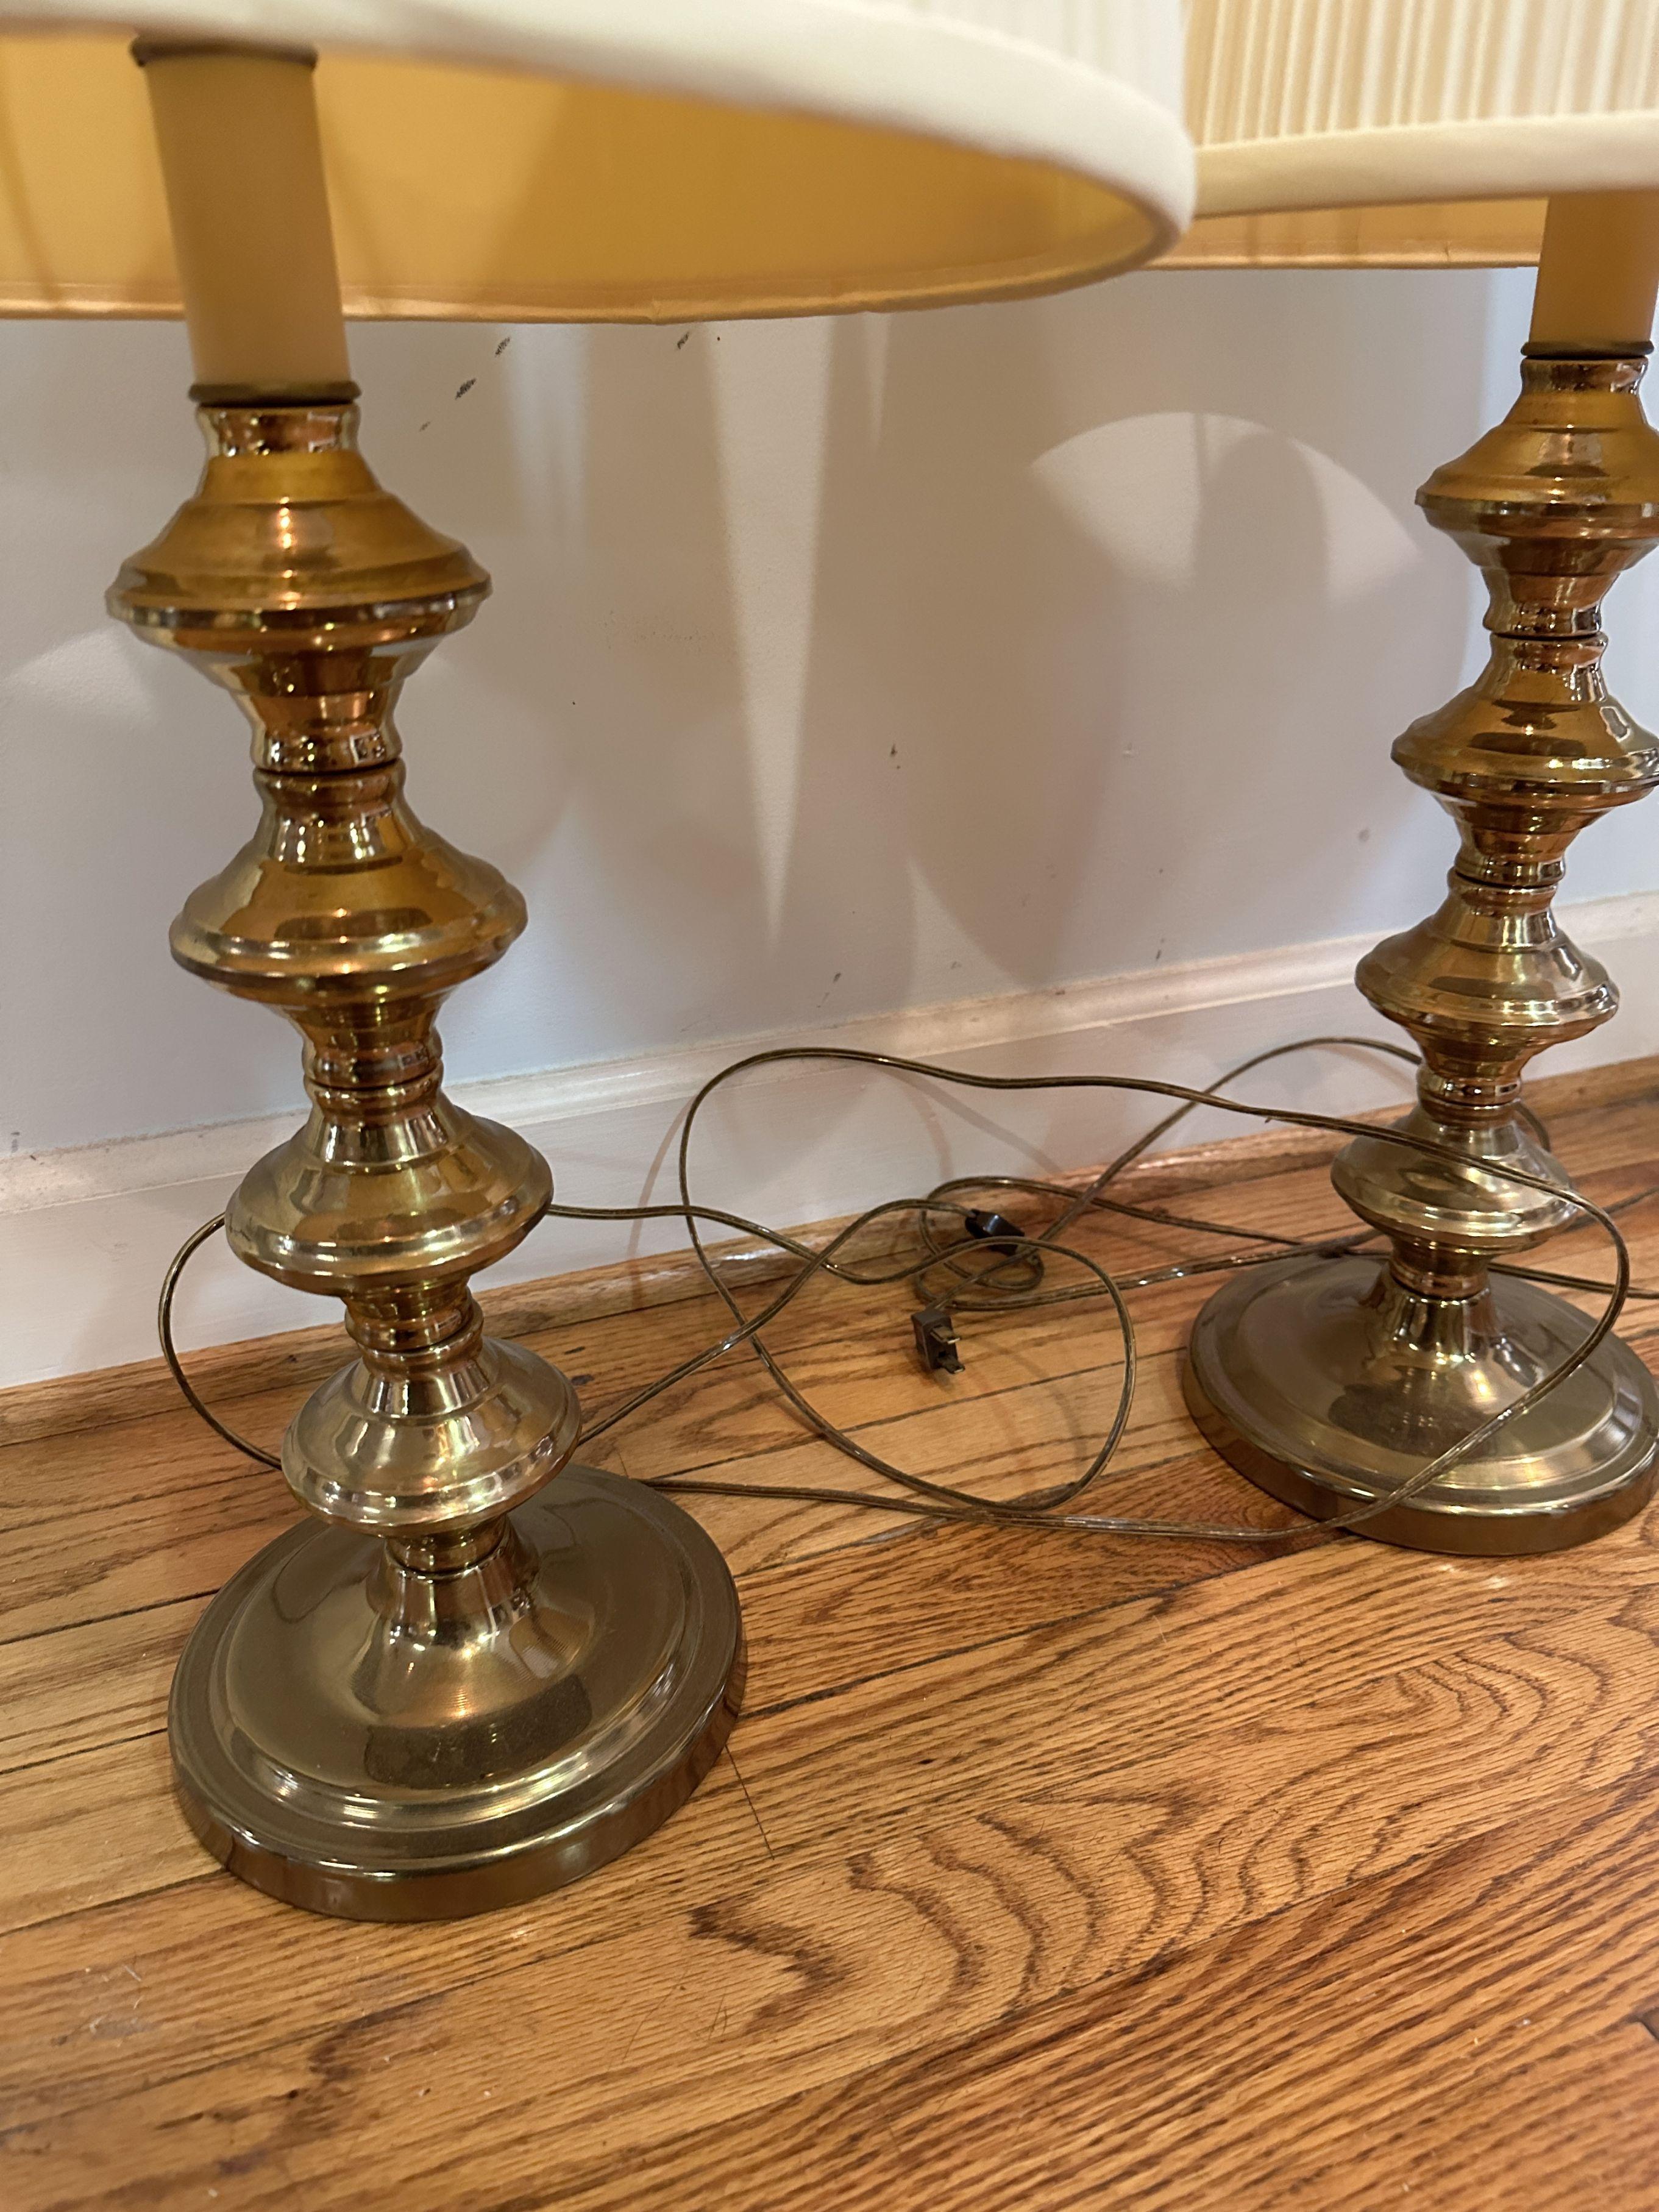 (2) Brass Table Lamps (Local Pick Up Only)